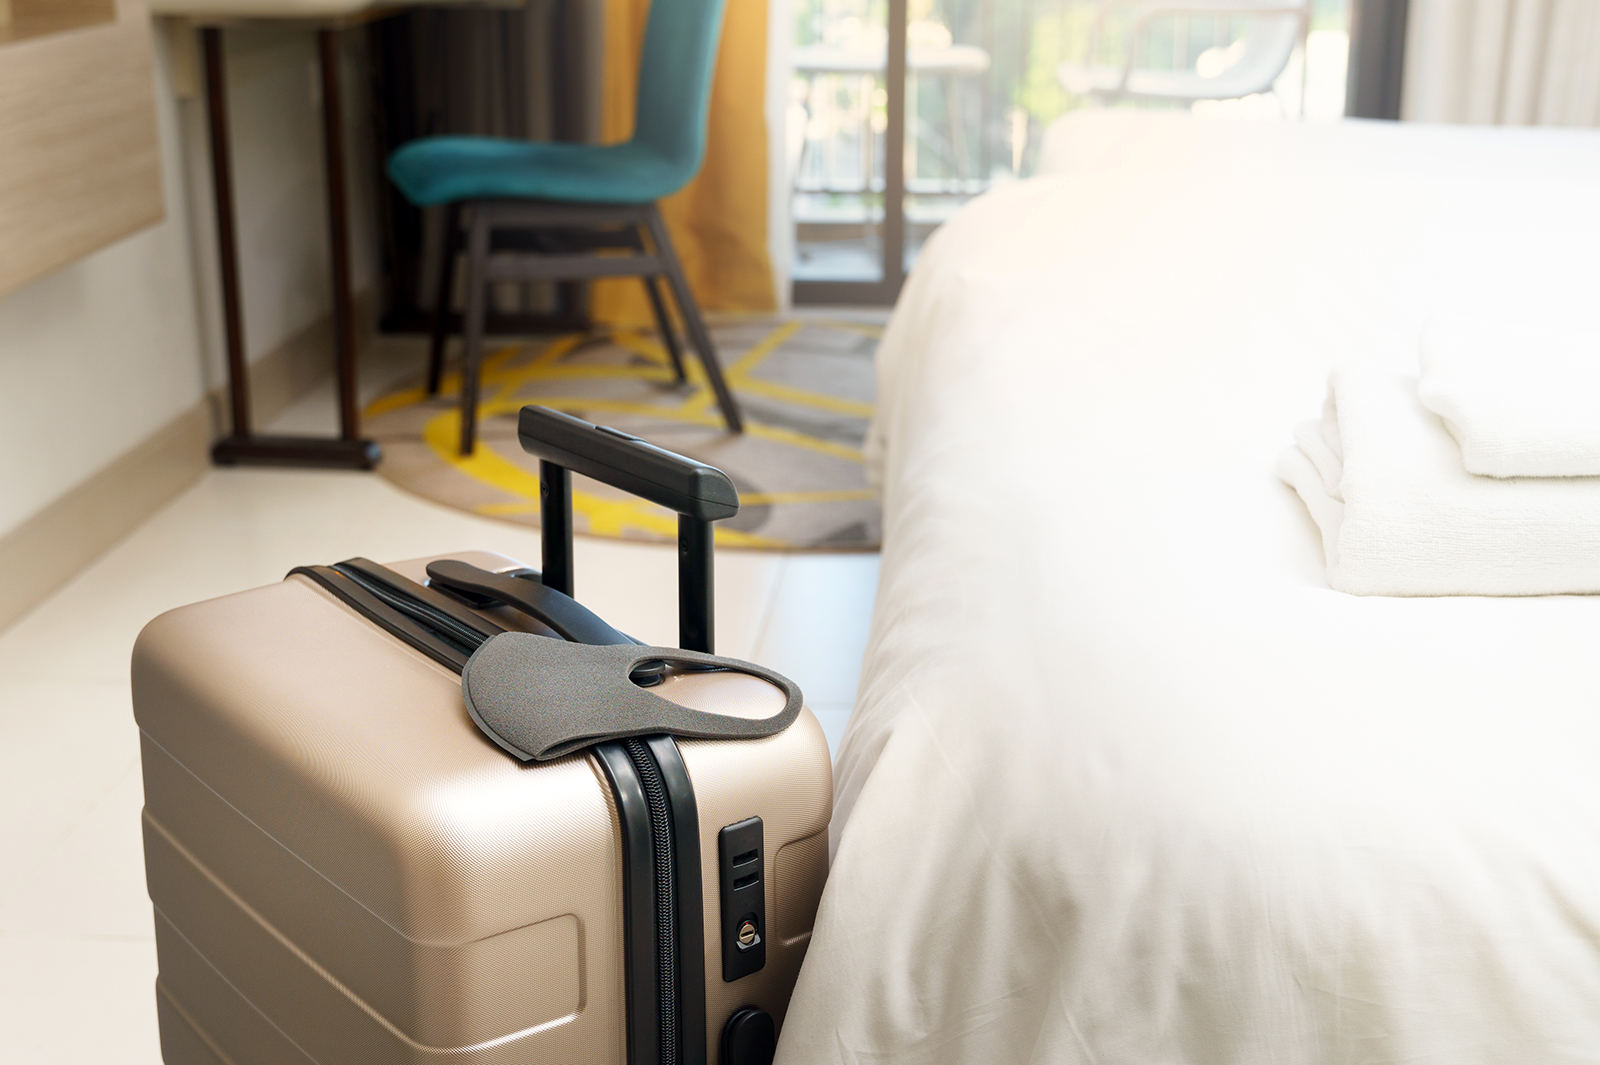 A CityU survey discovers that respondents prefer that the number of days required for inbound travellers to stay in quarantine hotels be reduced; about 60% of respondents support the “0+7” model.